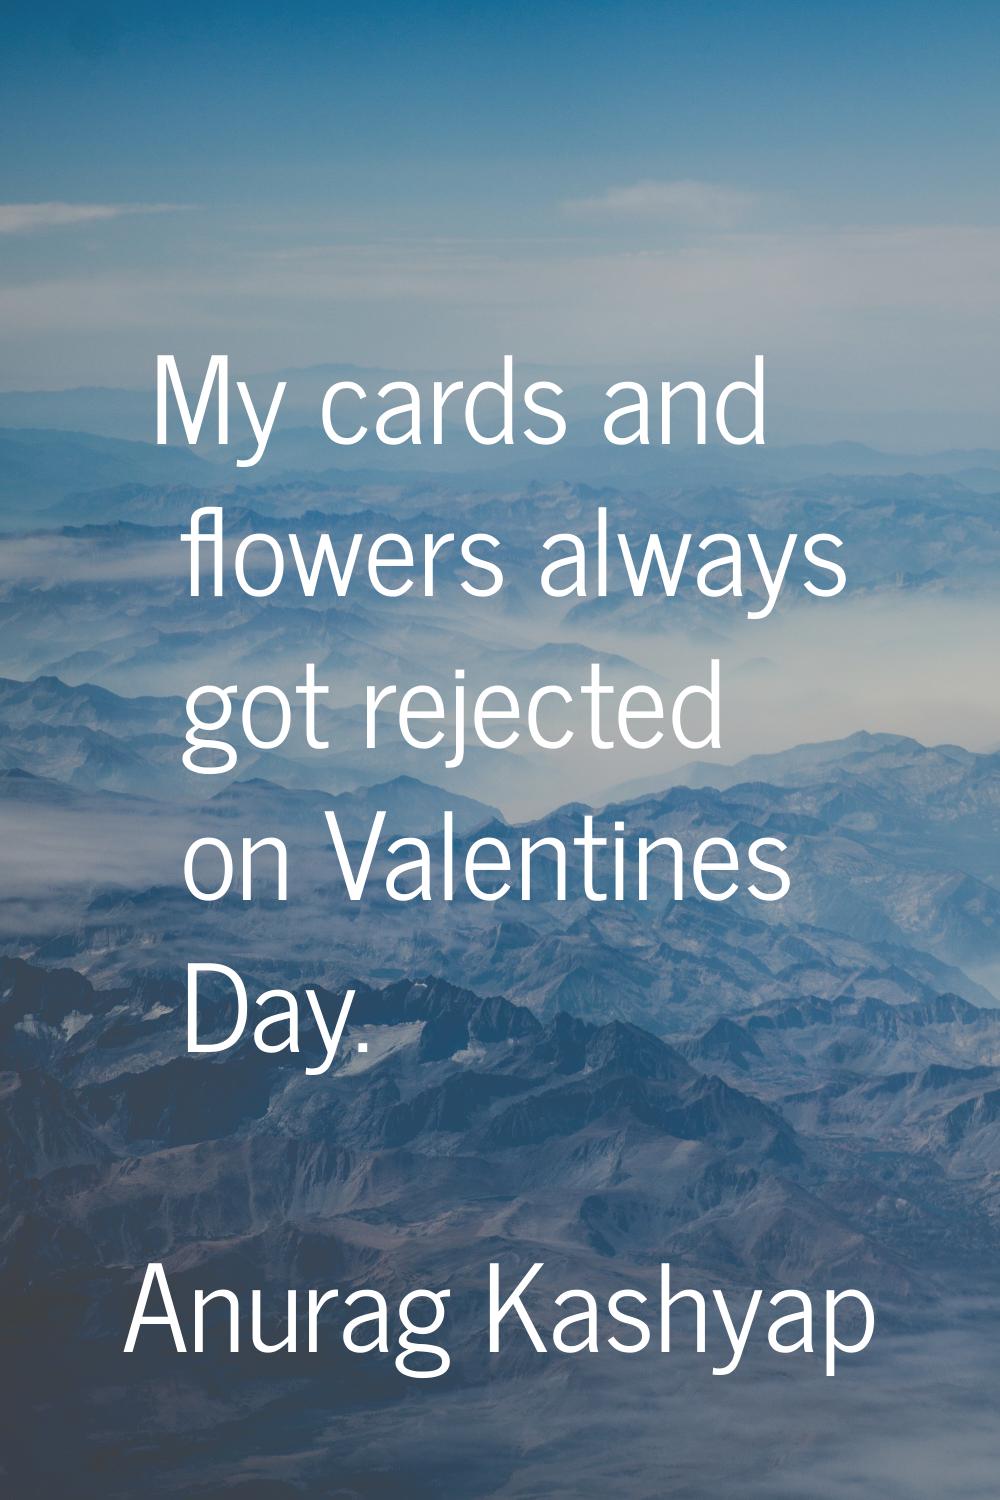 My cards and flowers always got rejected on Valentines Day.